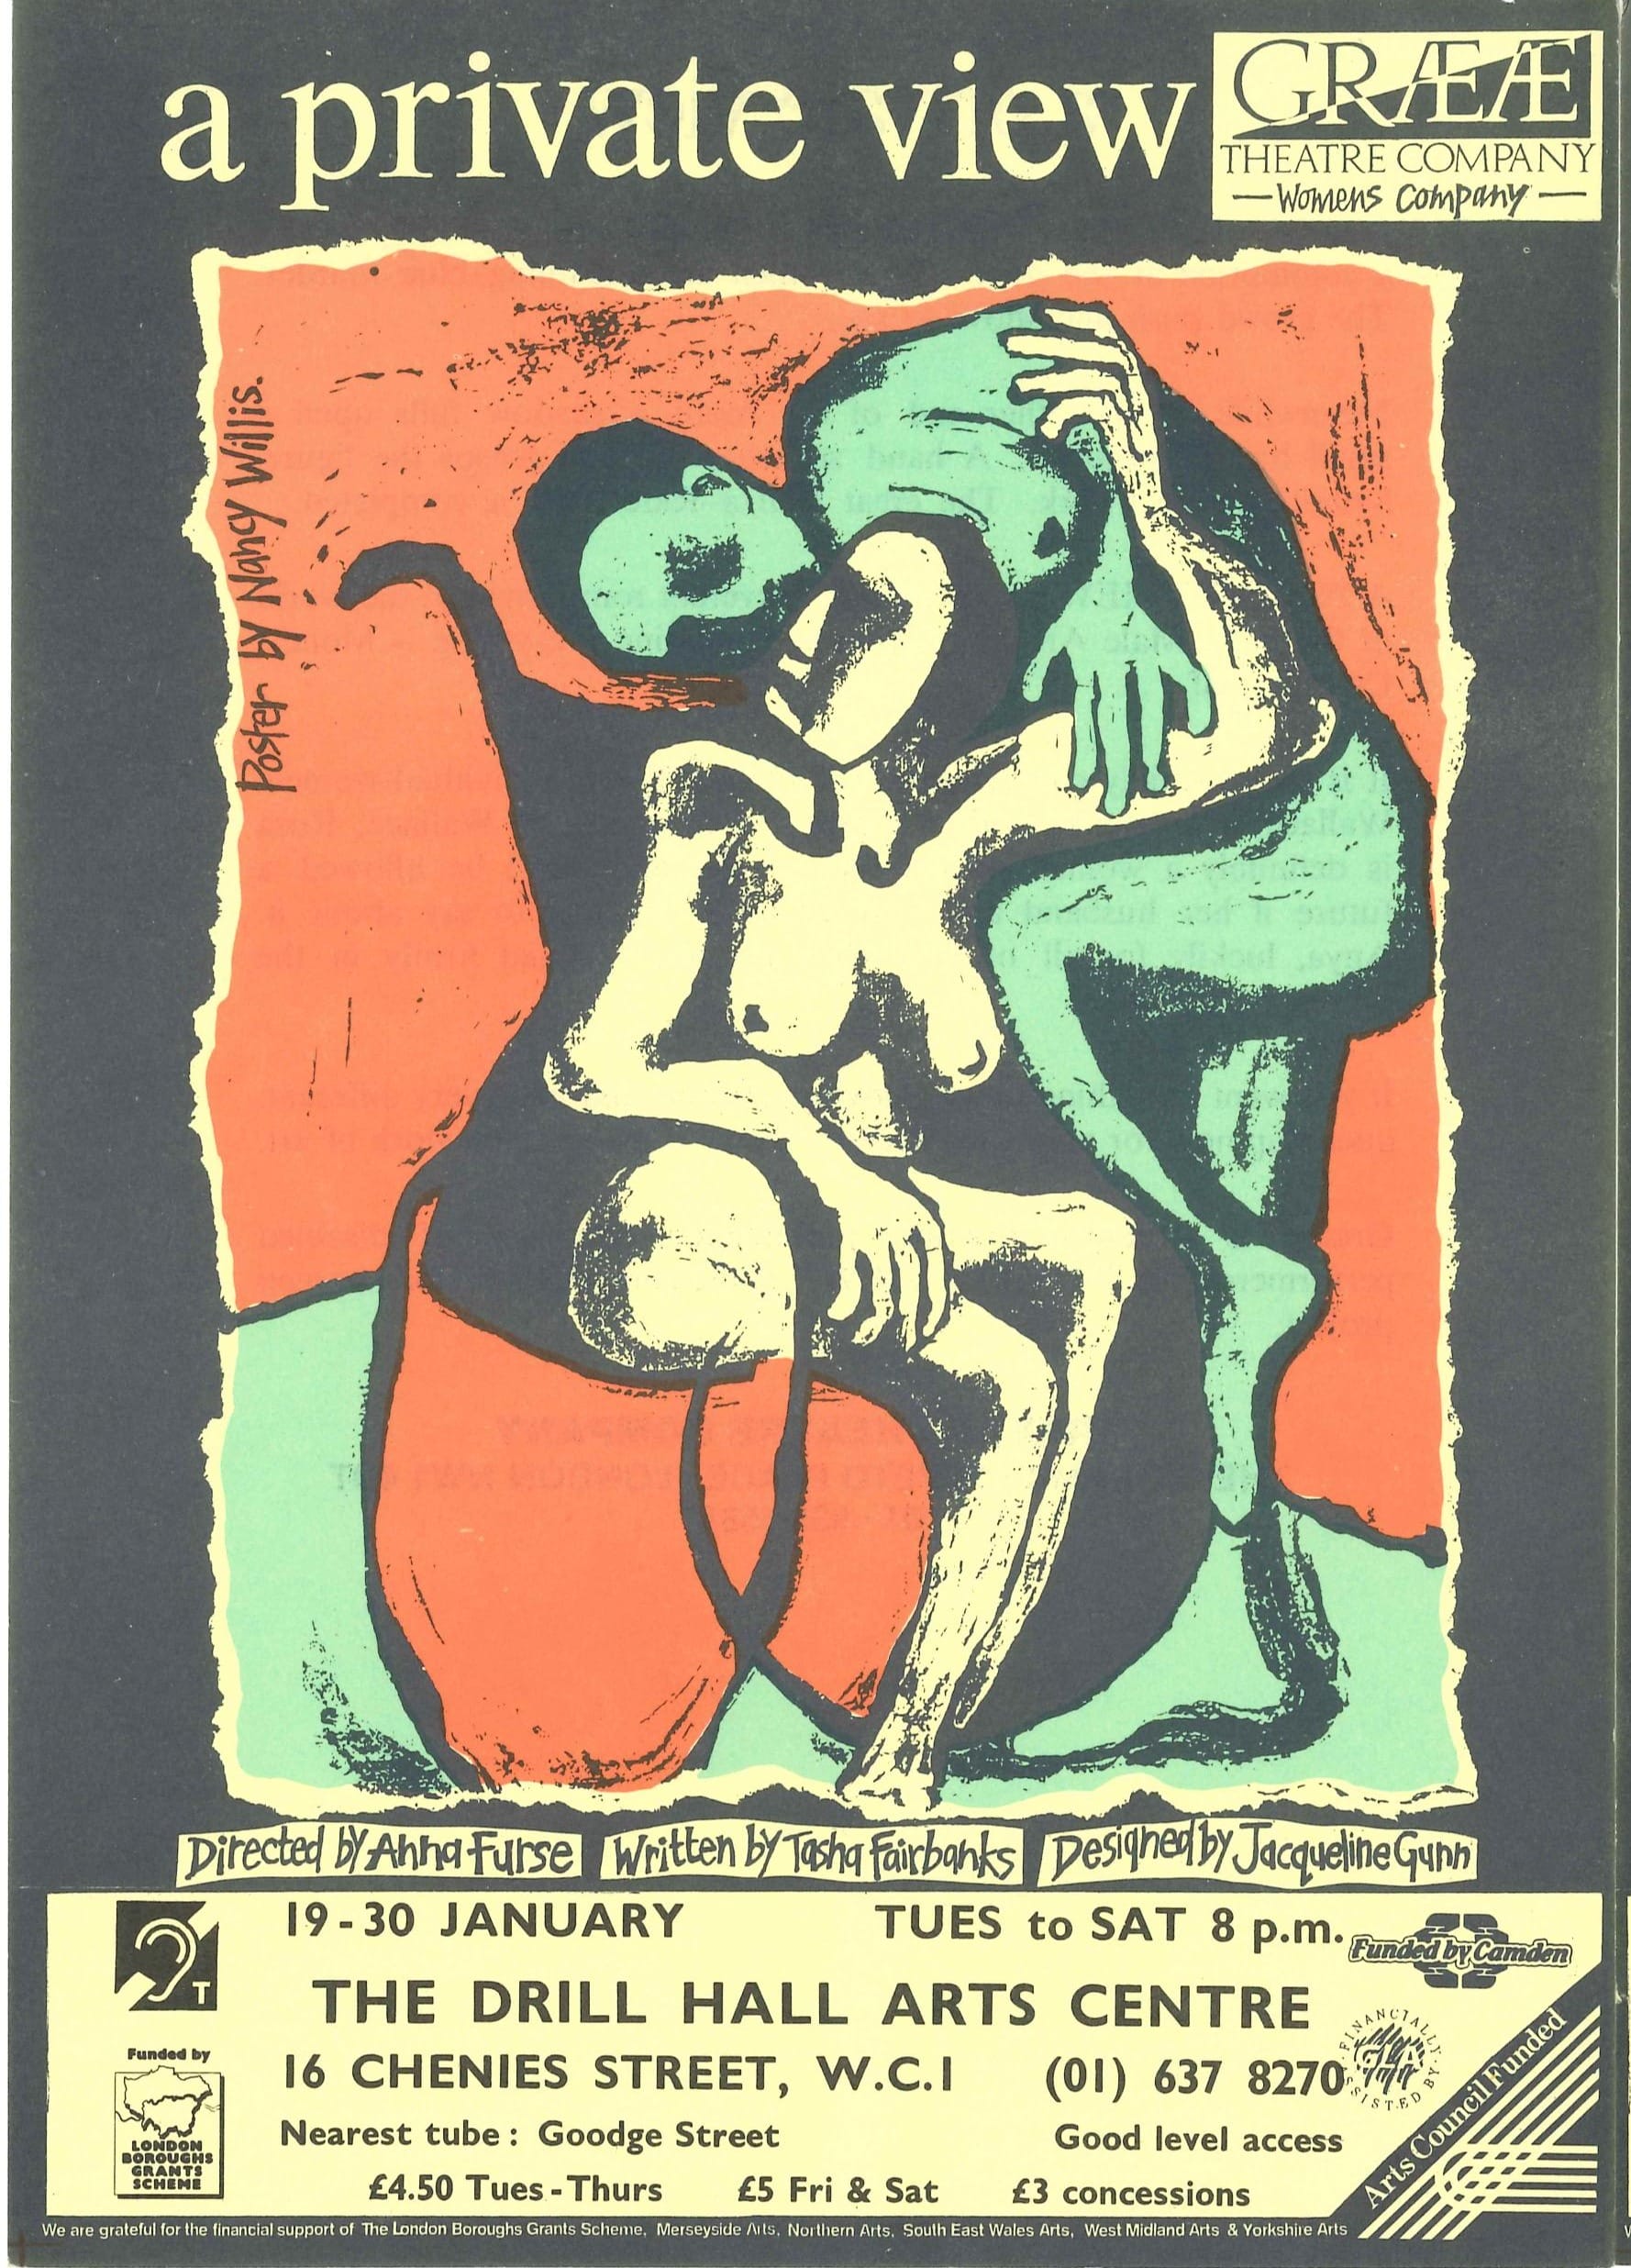 A poster for Graeae's production of 'A Private View'. The poster is an abstarct drawing of two nude people, one of whom is sitting in a wheelchair.